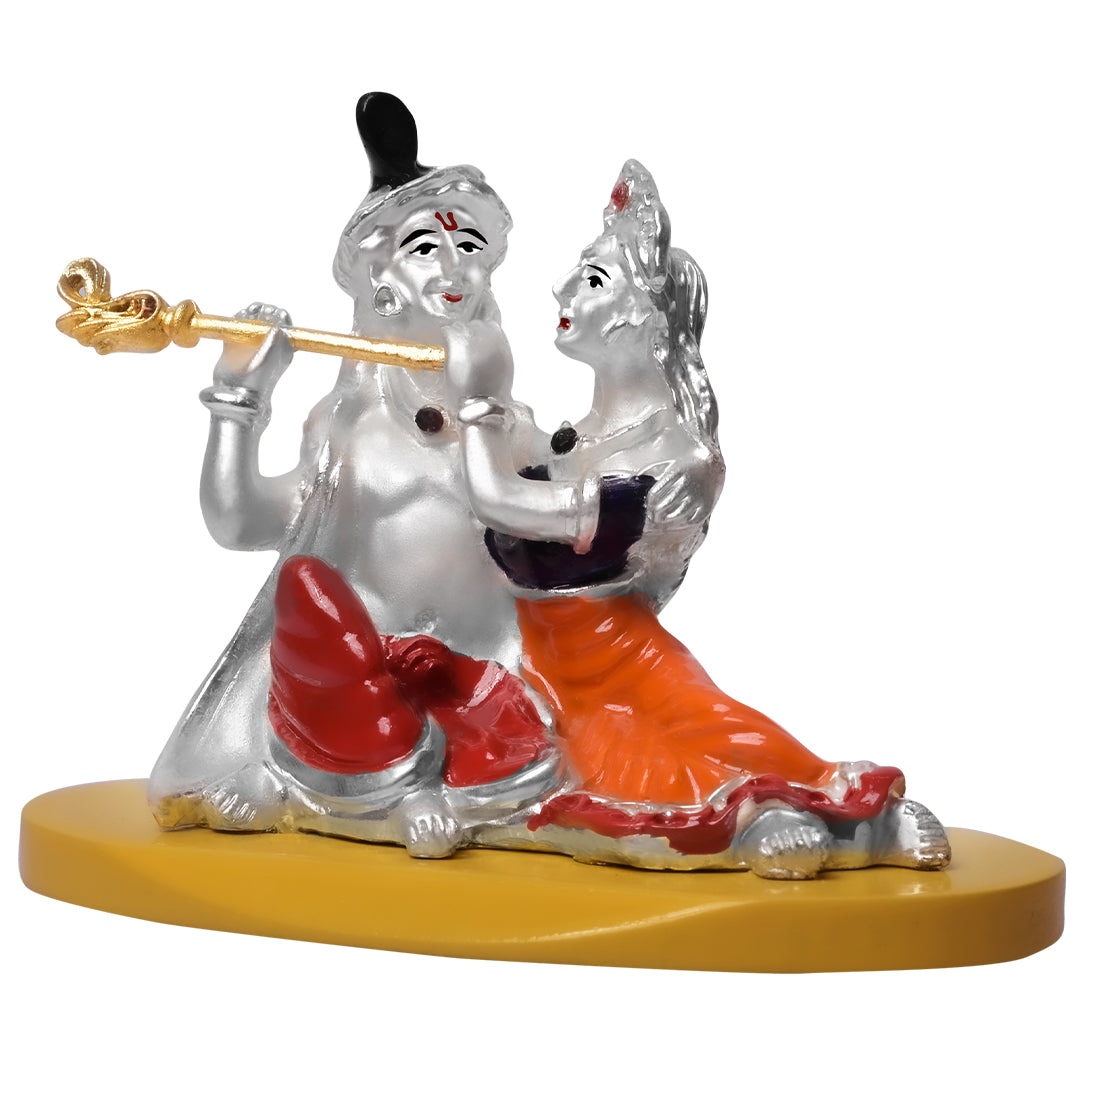 Silver & Gold Plated Radha Krishna Idol with Cow for Home Temple Gift 11 x  9 Cm | eBay